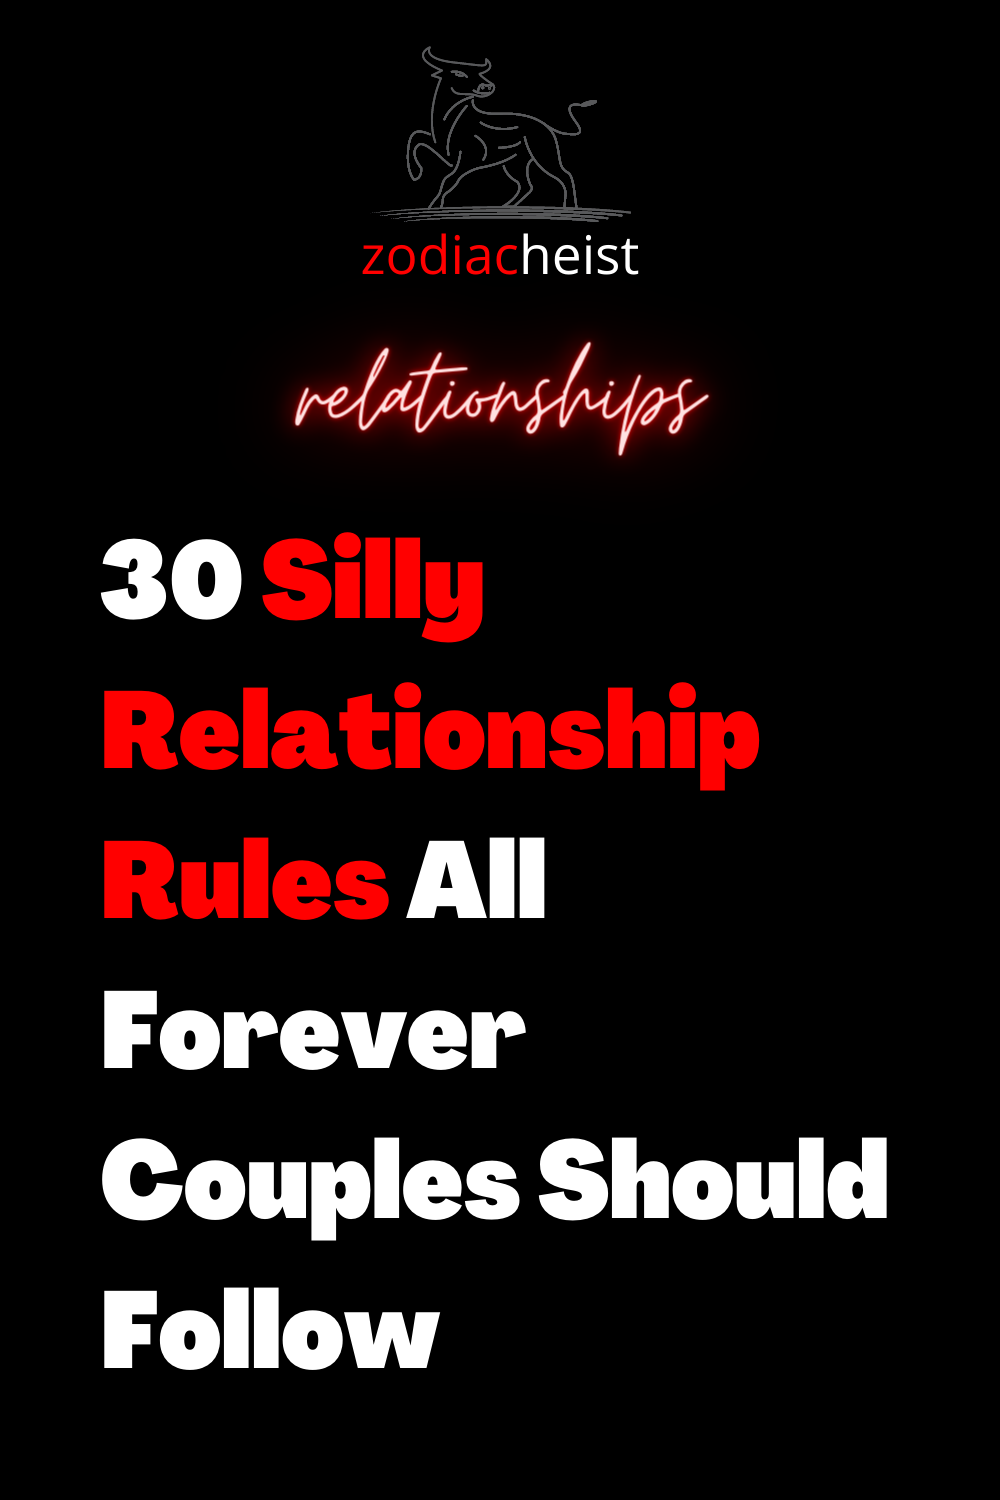 30 Silly Relationship Rules All Forever Couples Should Follow